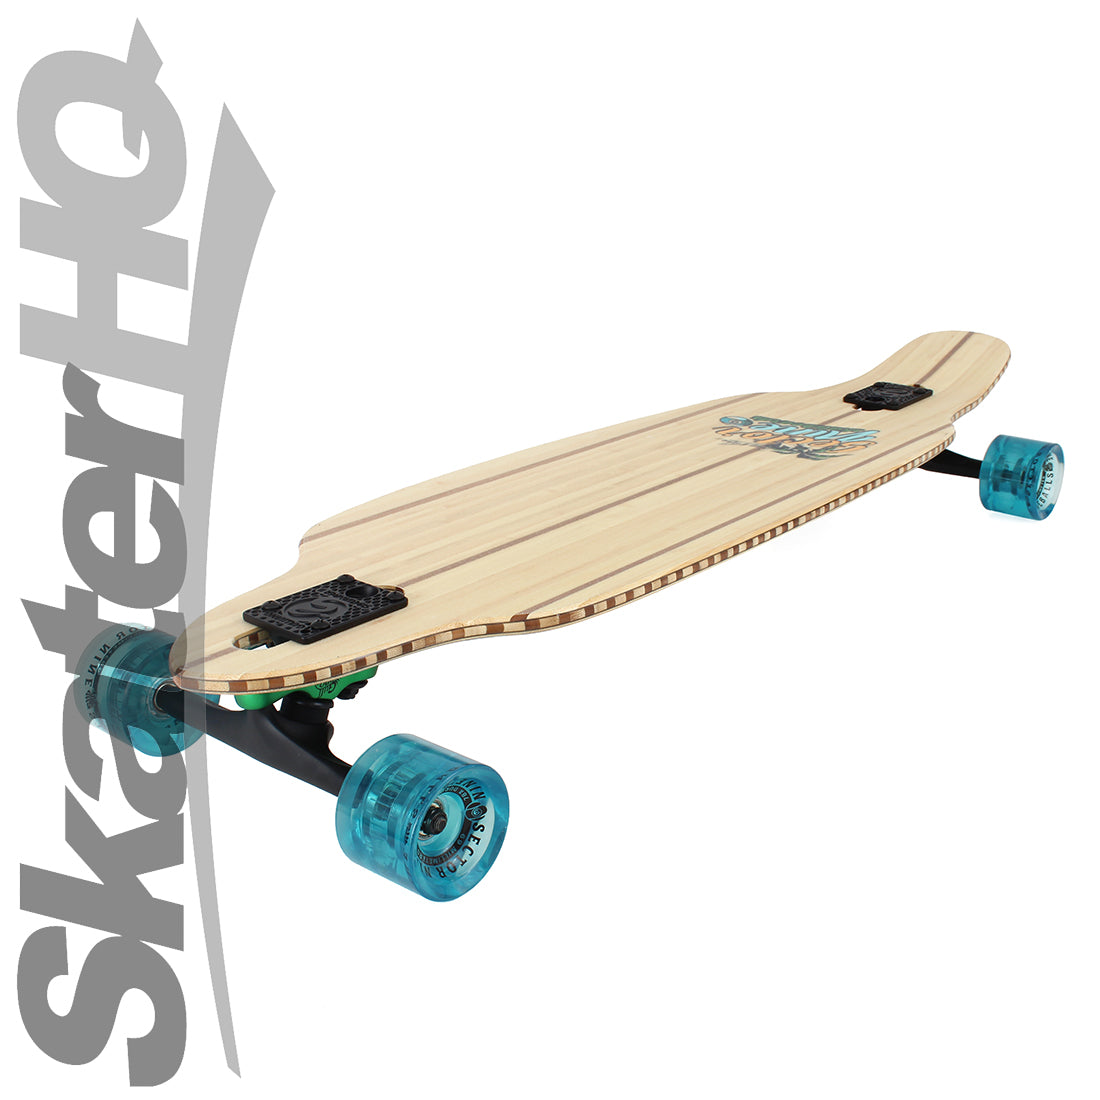 Sector 9 Striker Canopy 36.5 Complete - Bamboo/Blue Skateboard Completes Longboards